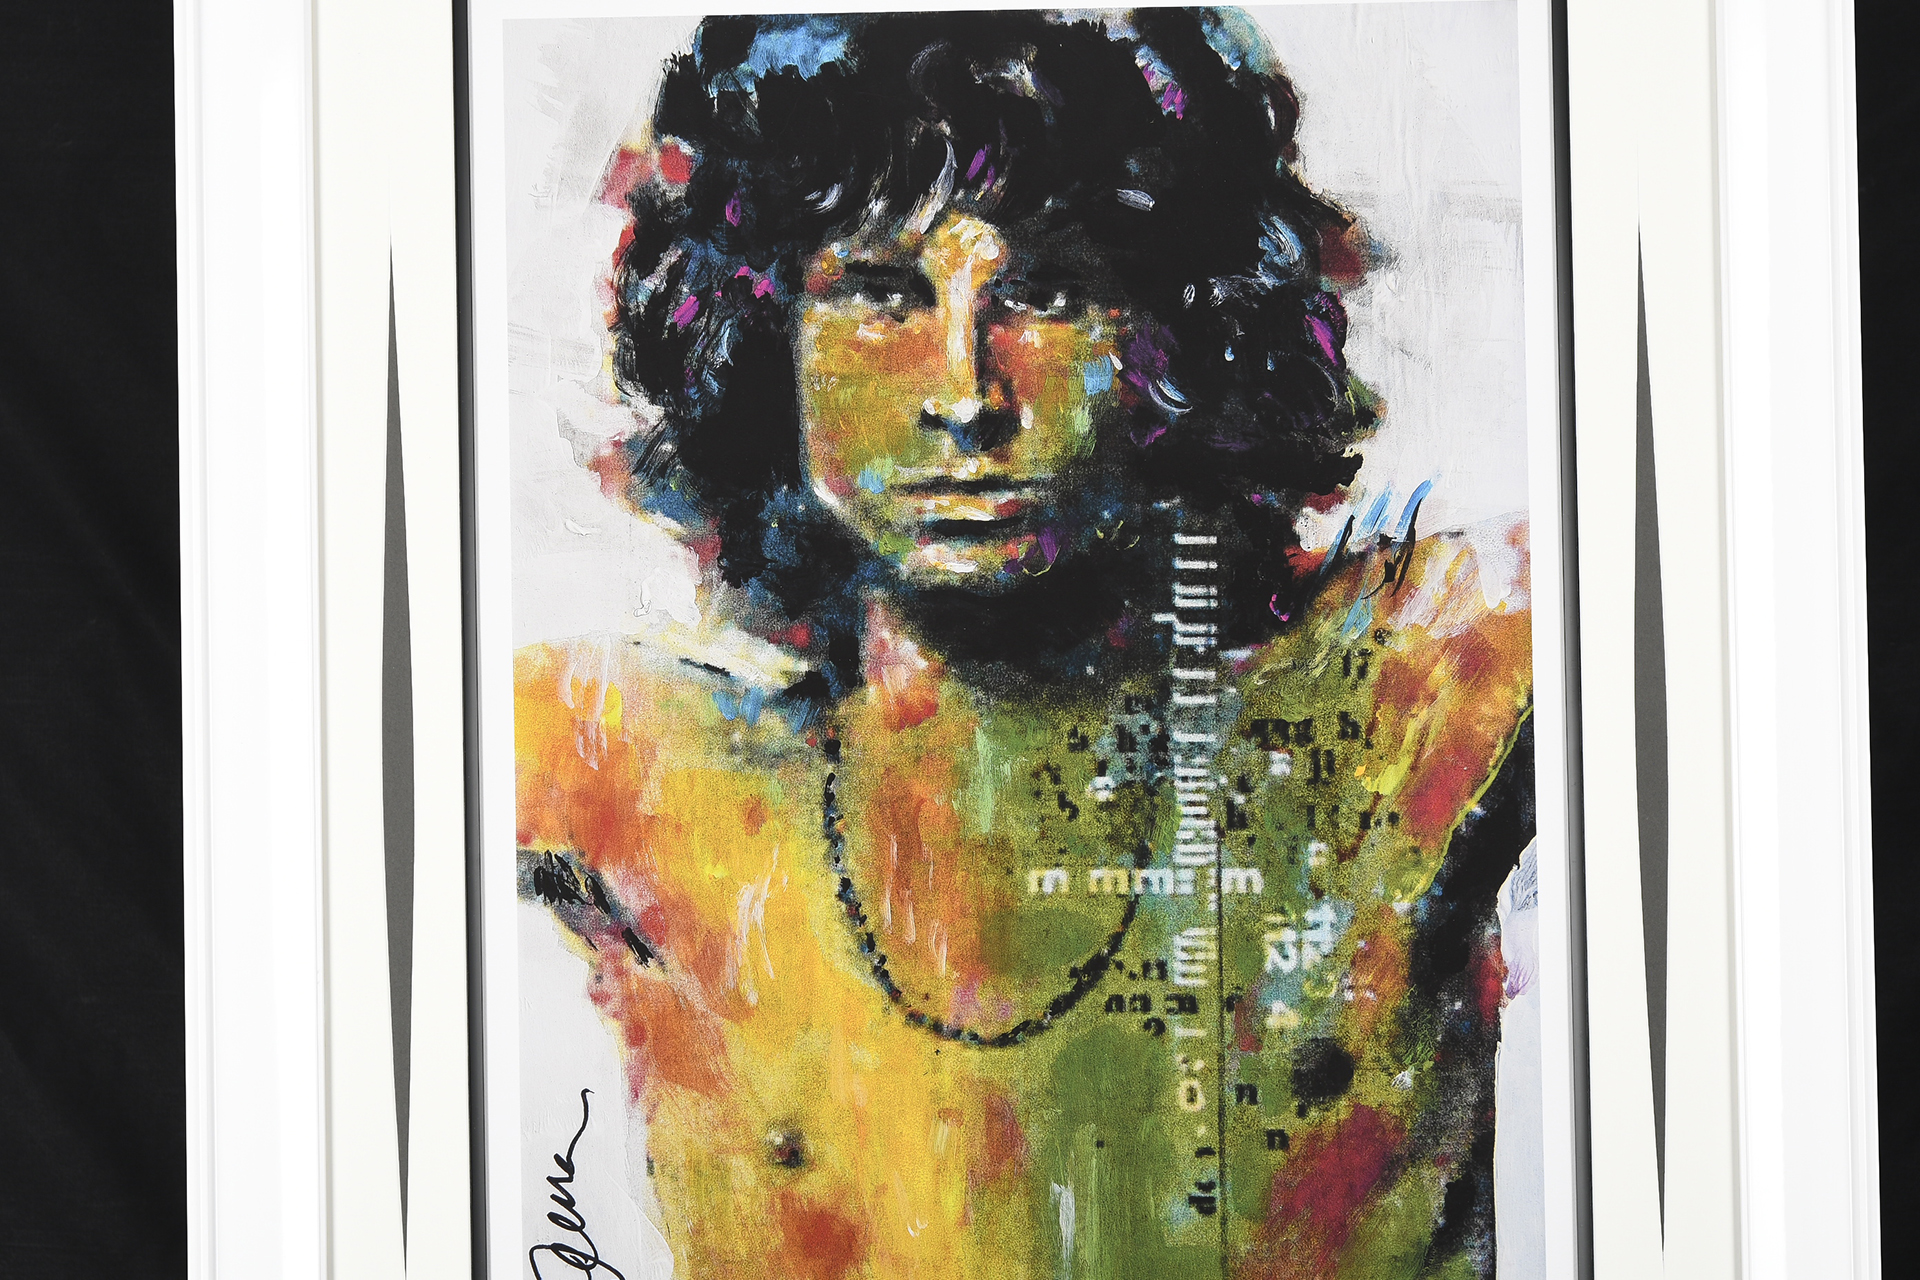 Large Authenticated Limited Edition by the Late Famous American Artist Sidney Maurer. (Jim Morrison)